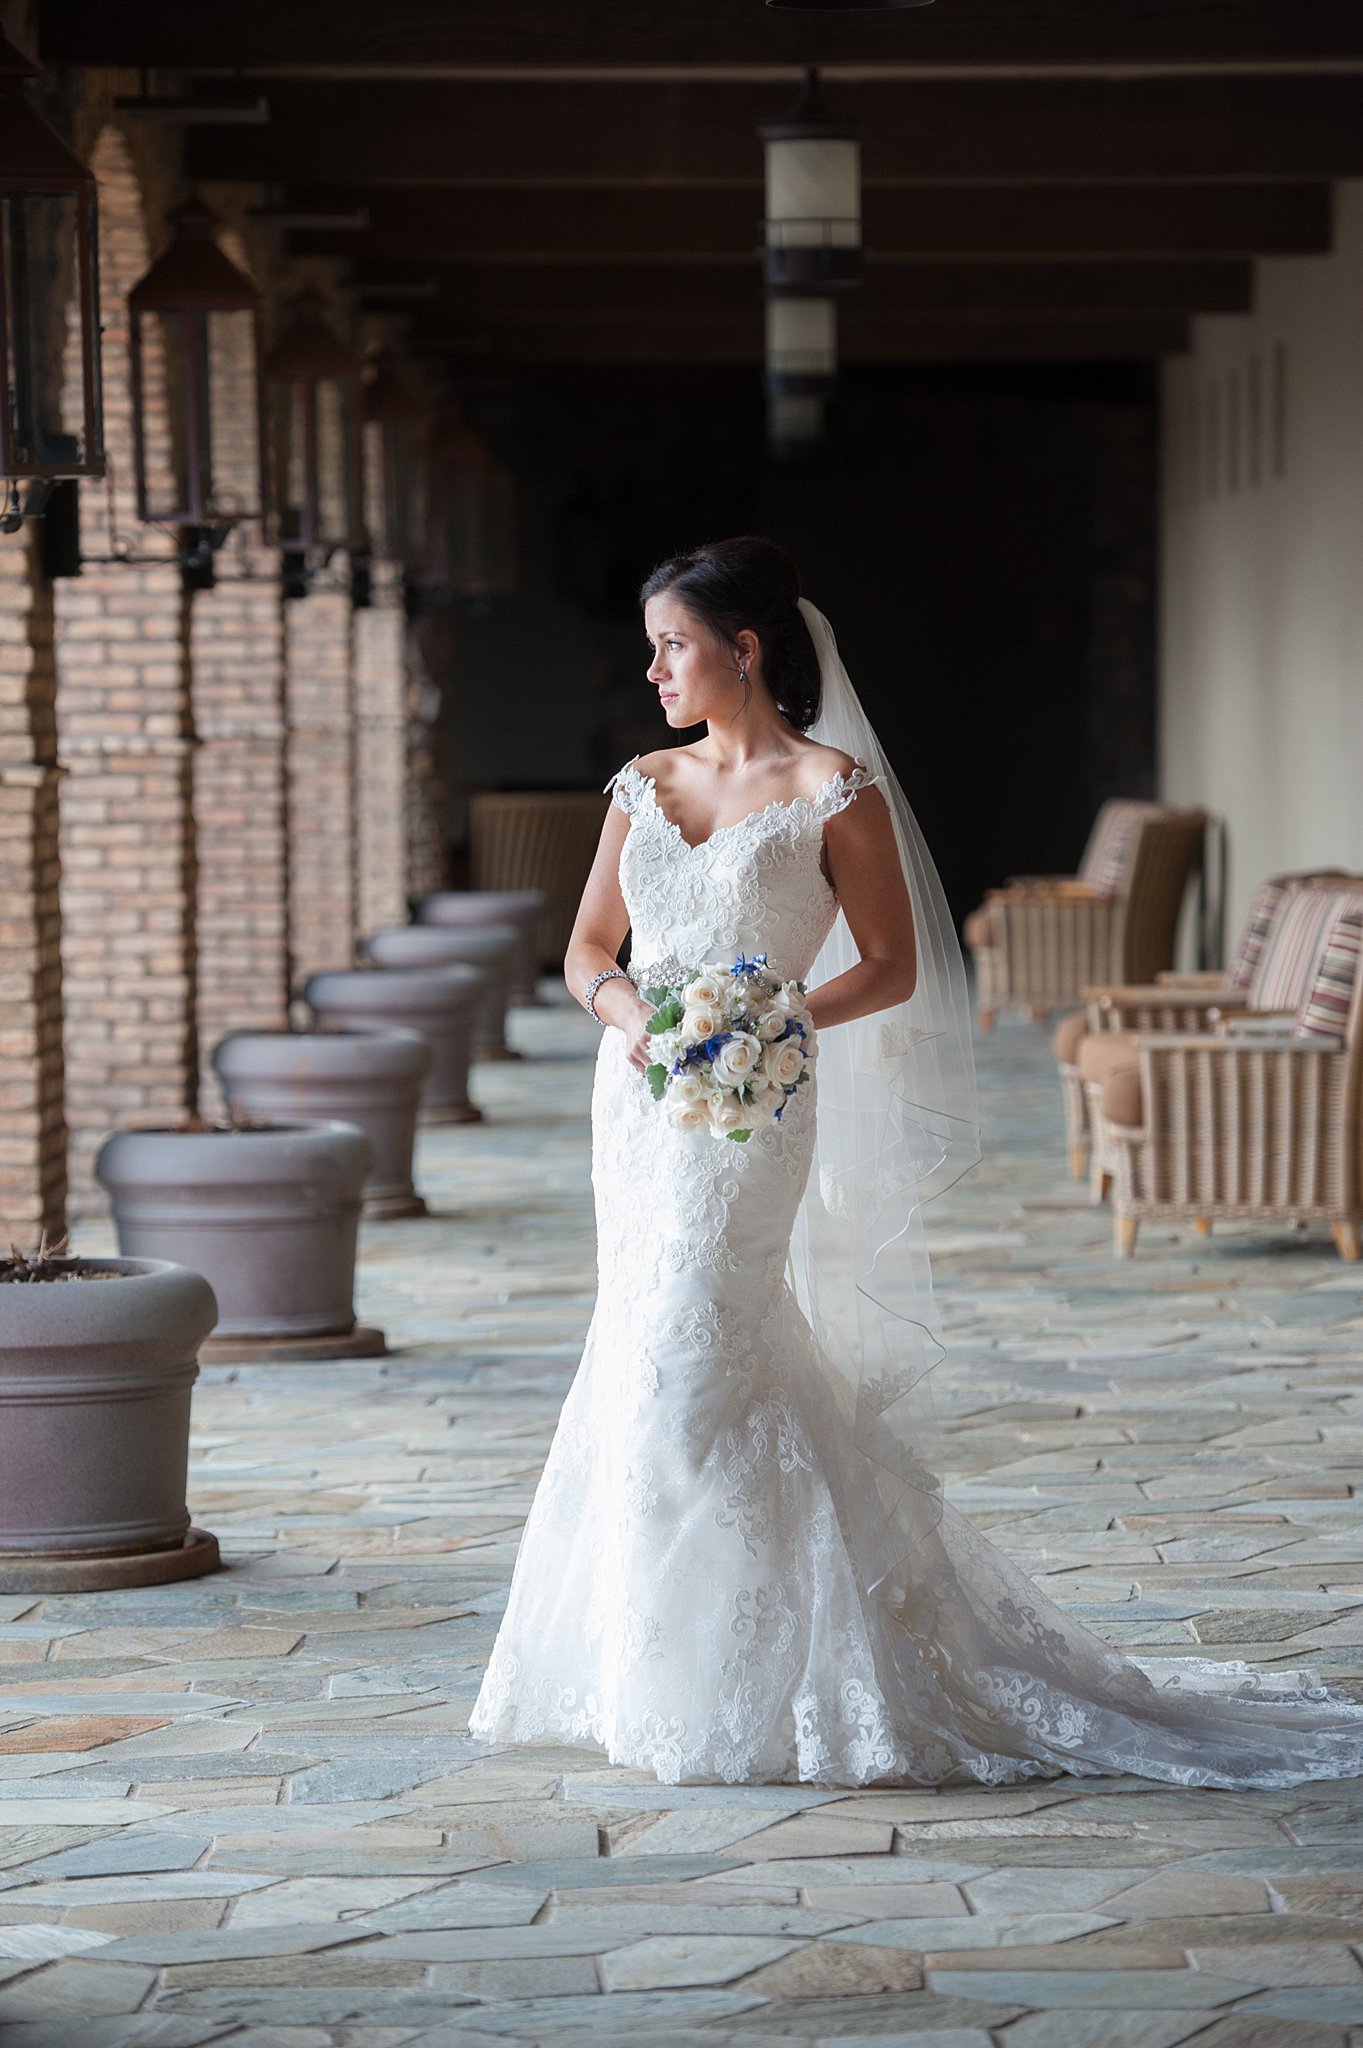 Bride in a white dress and long veil stands in on a stone patio colorado springs wedding planners